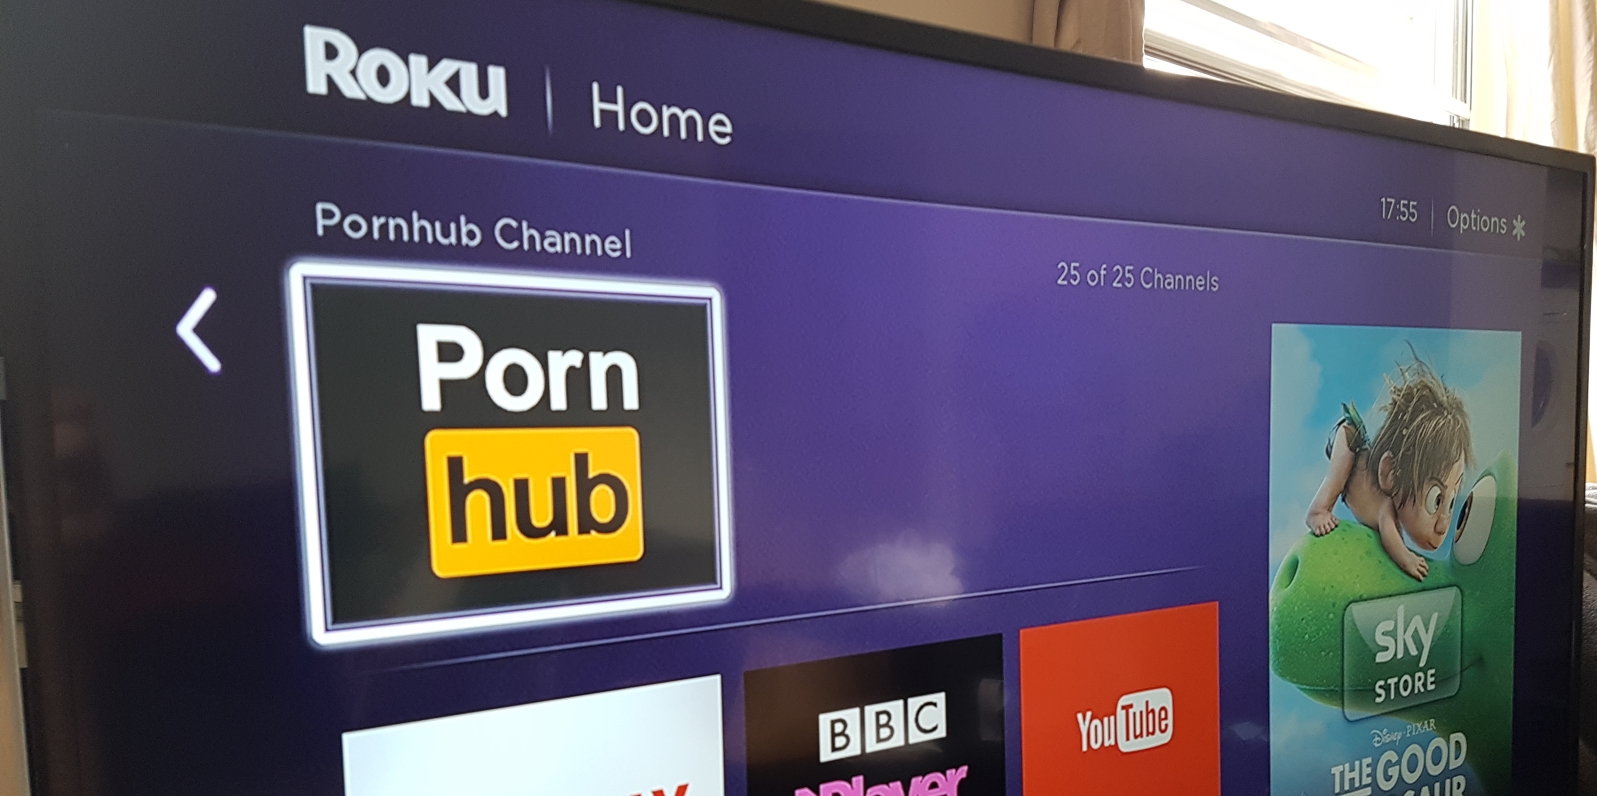 why does pornhub roku take a day to load , why is pornhub slower than youtube?